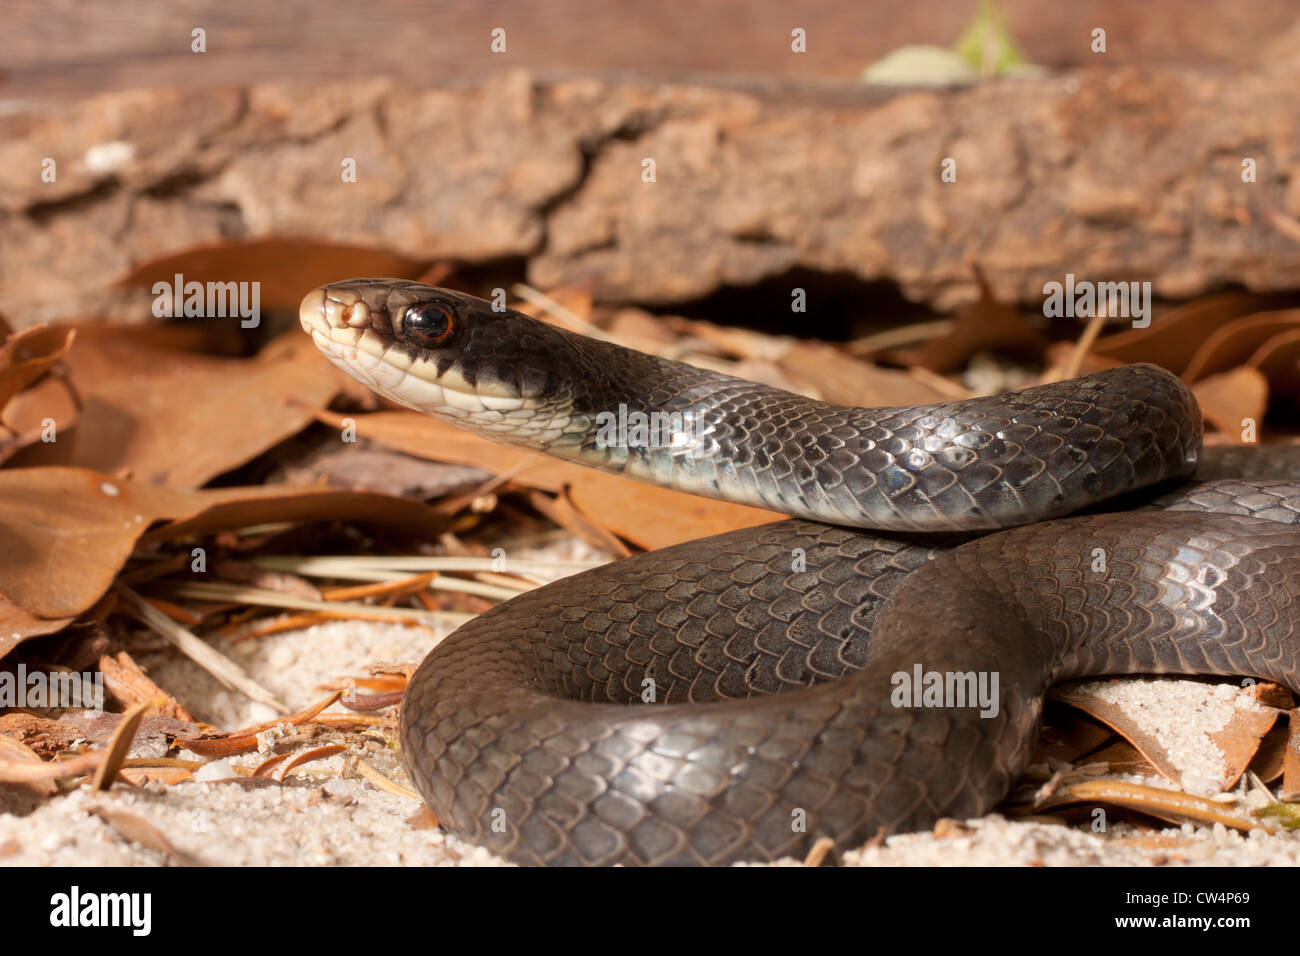 Northern black racer - Coluber constrictor constrictor Stock Photo